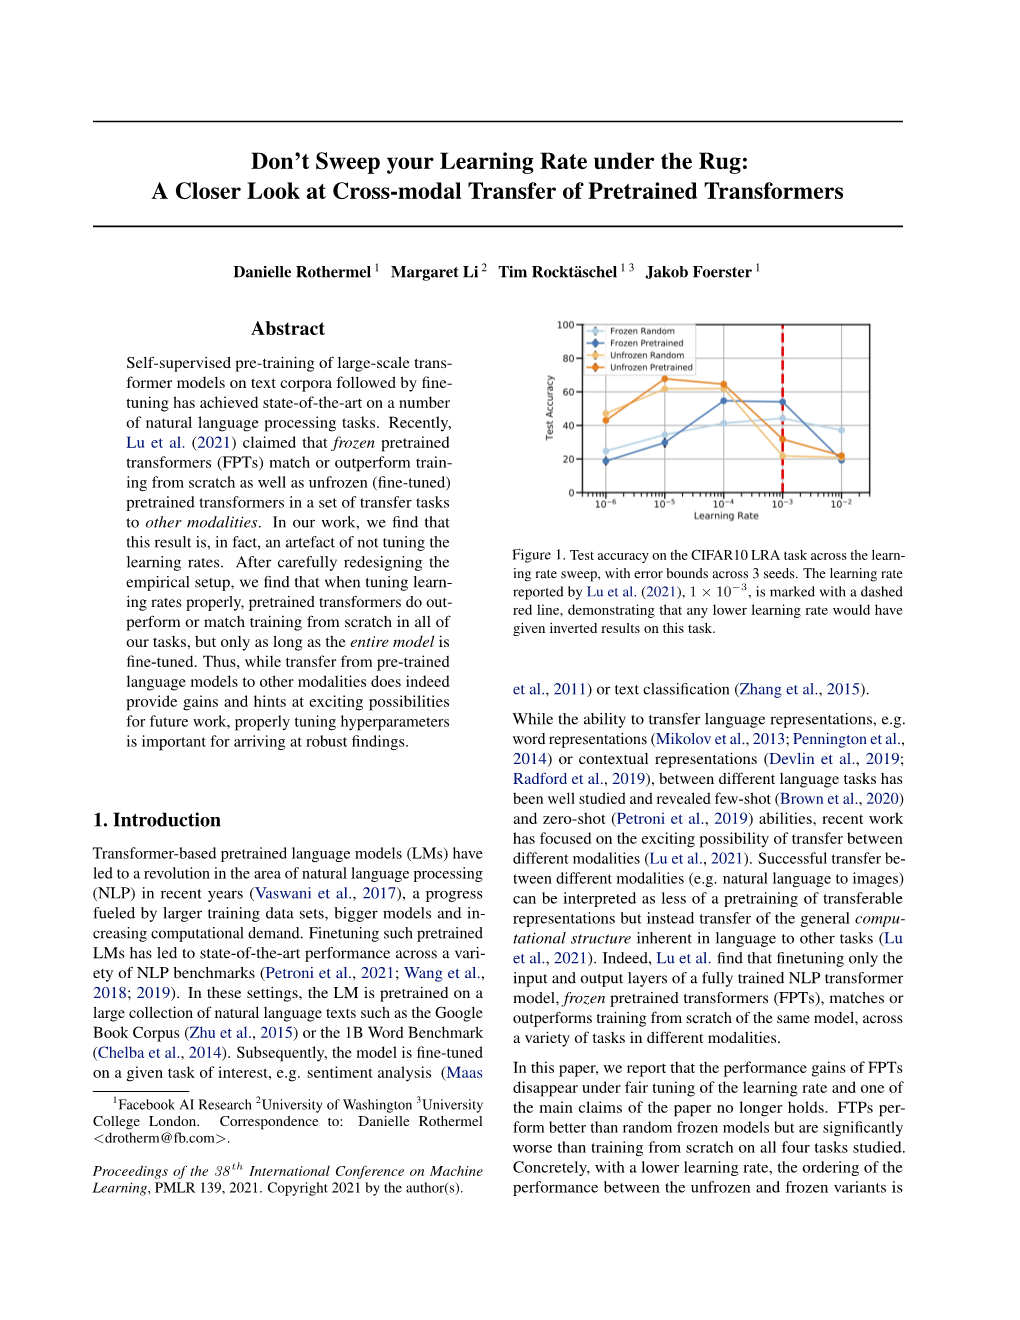 A Closer Look at Cross-Modal Transfer of Pretrained Transformers